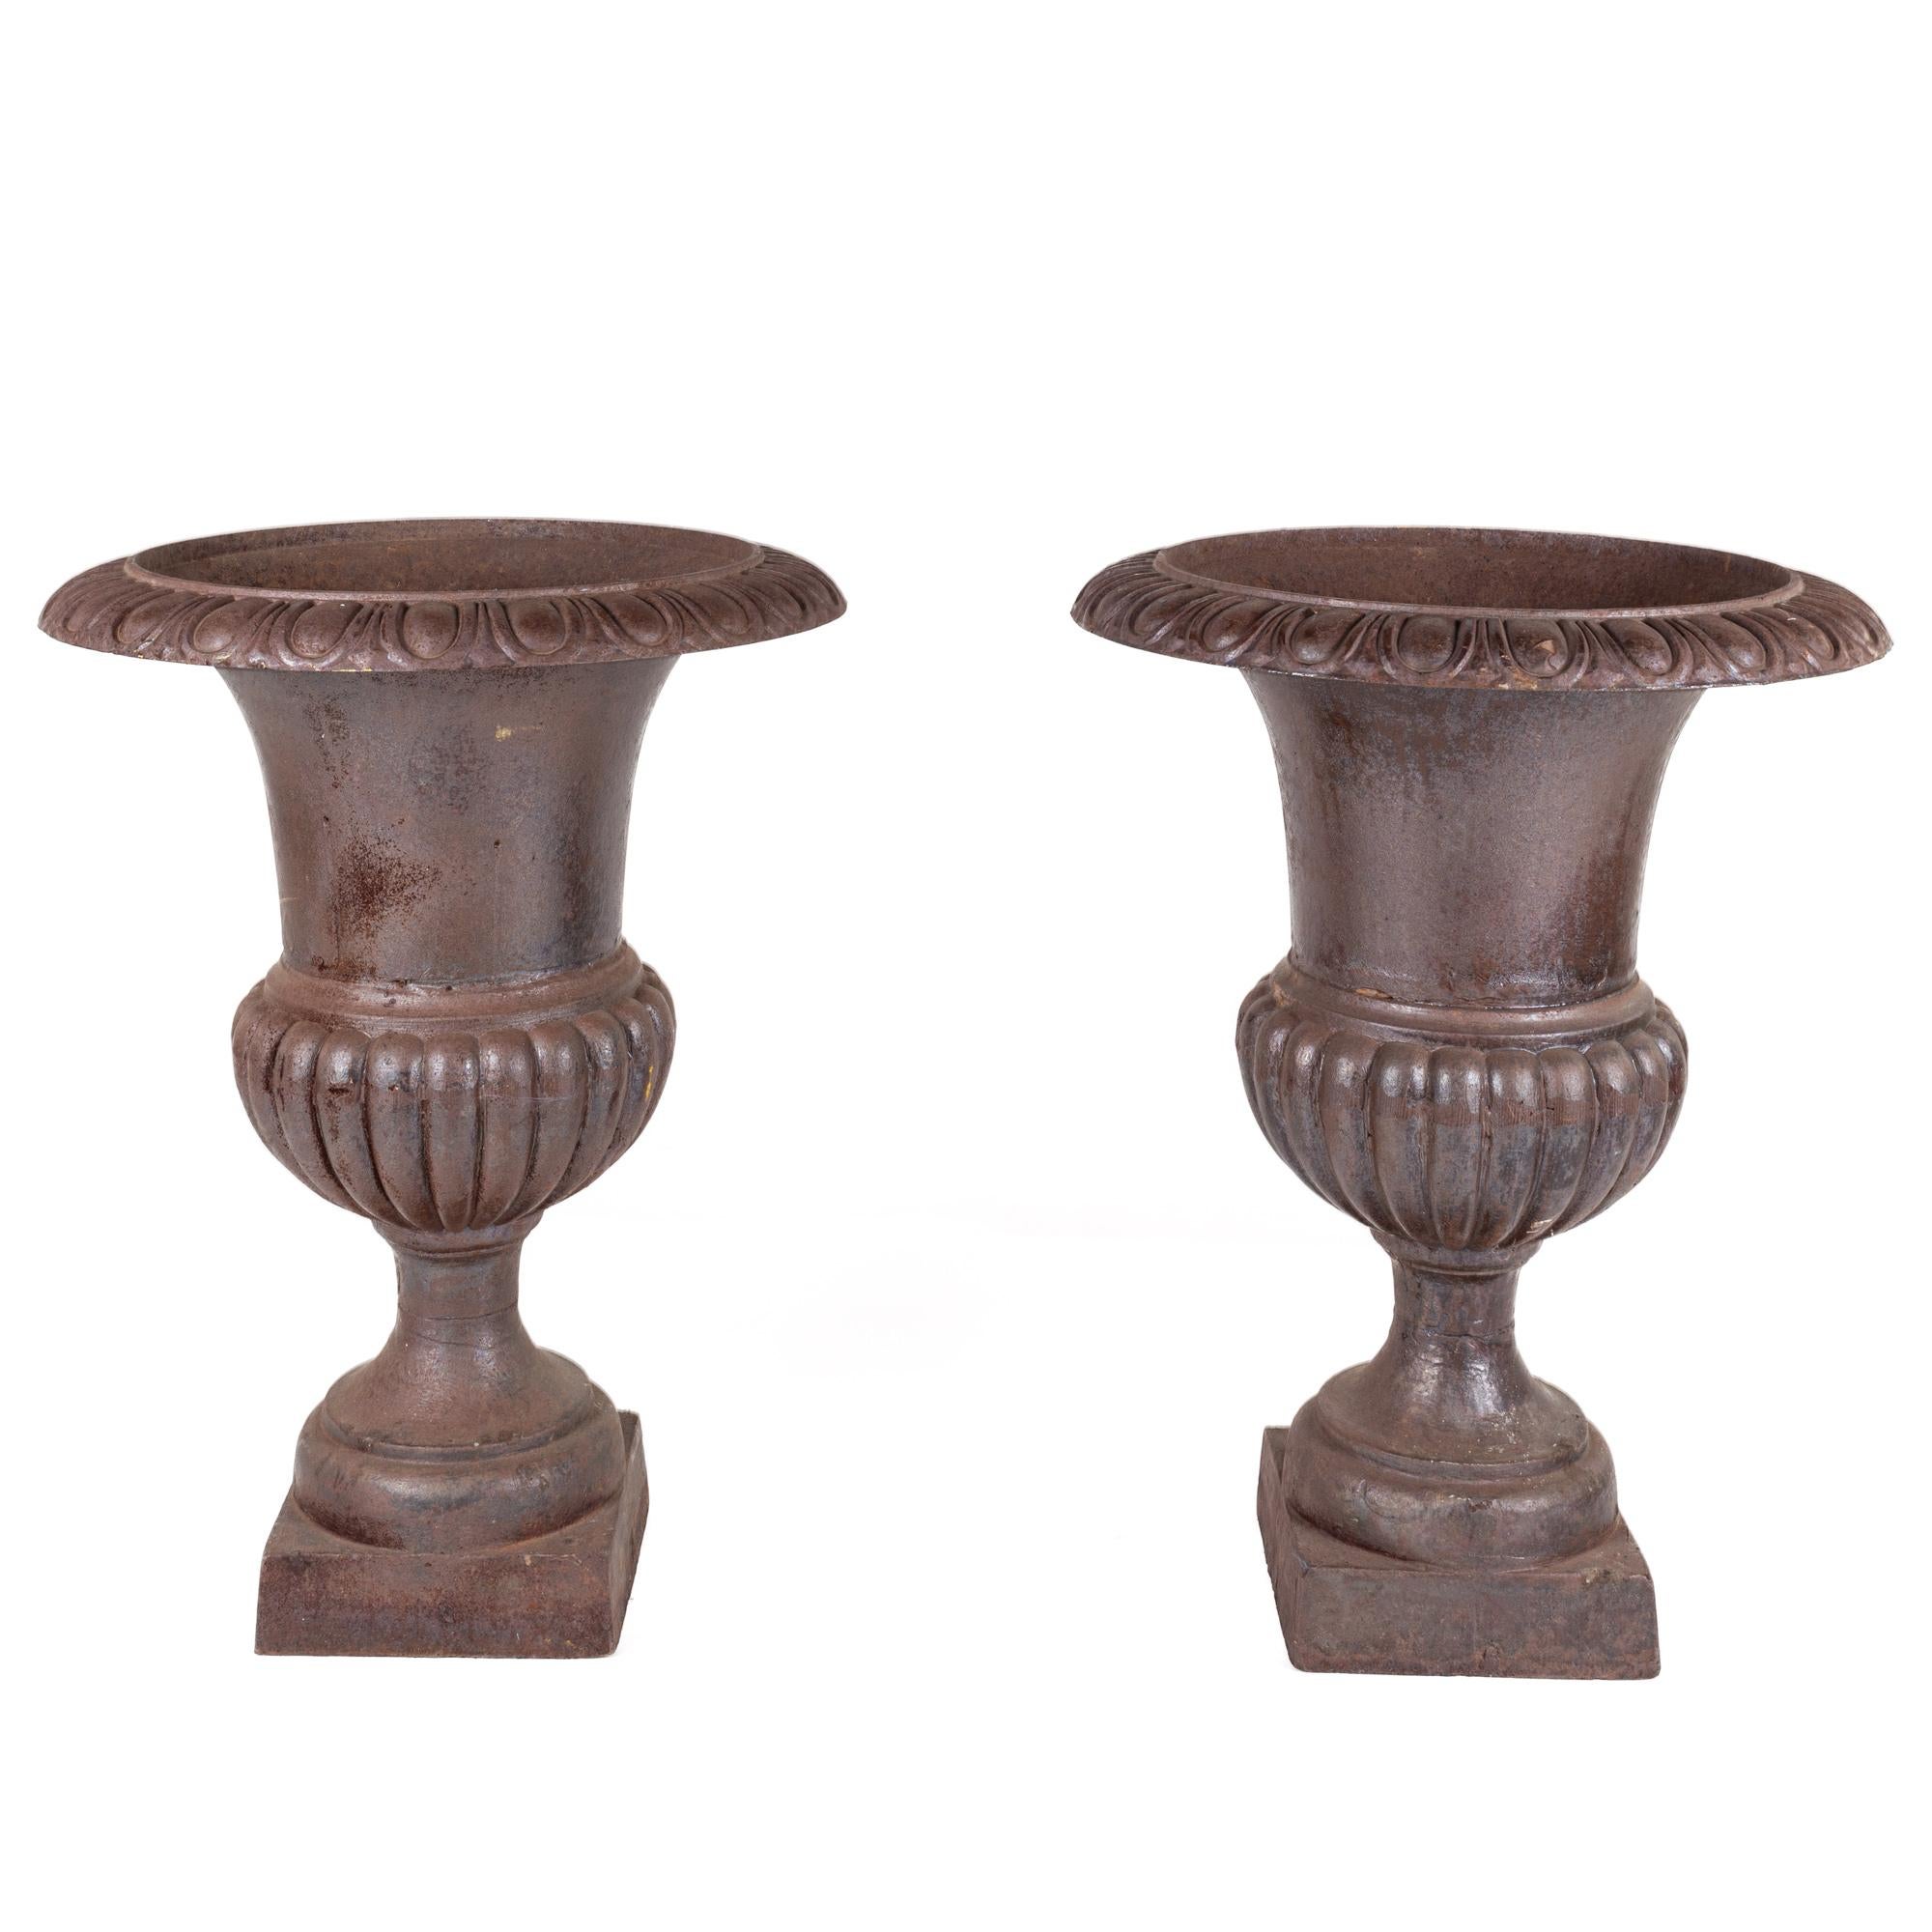 Antique large iron garden urns planters - pair

Each planter measures: 22 wide x 22 deep x 30 inches high

This set is in Good Vintage Condition with missing rim on one, minor marks, dents, and wear.

We take our photos in a controlled